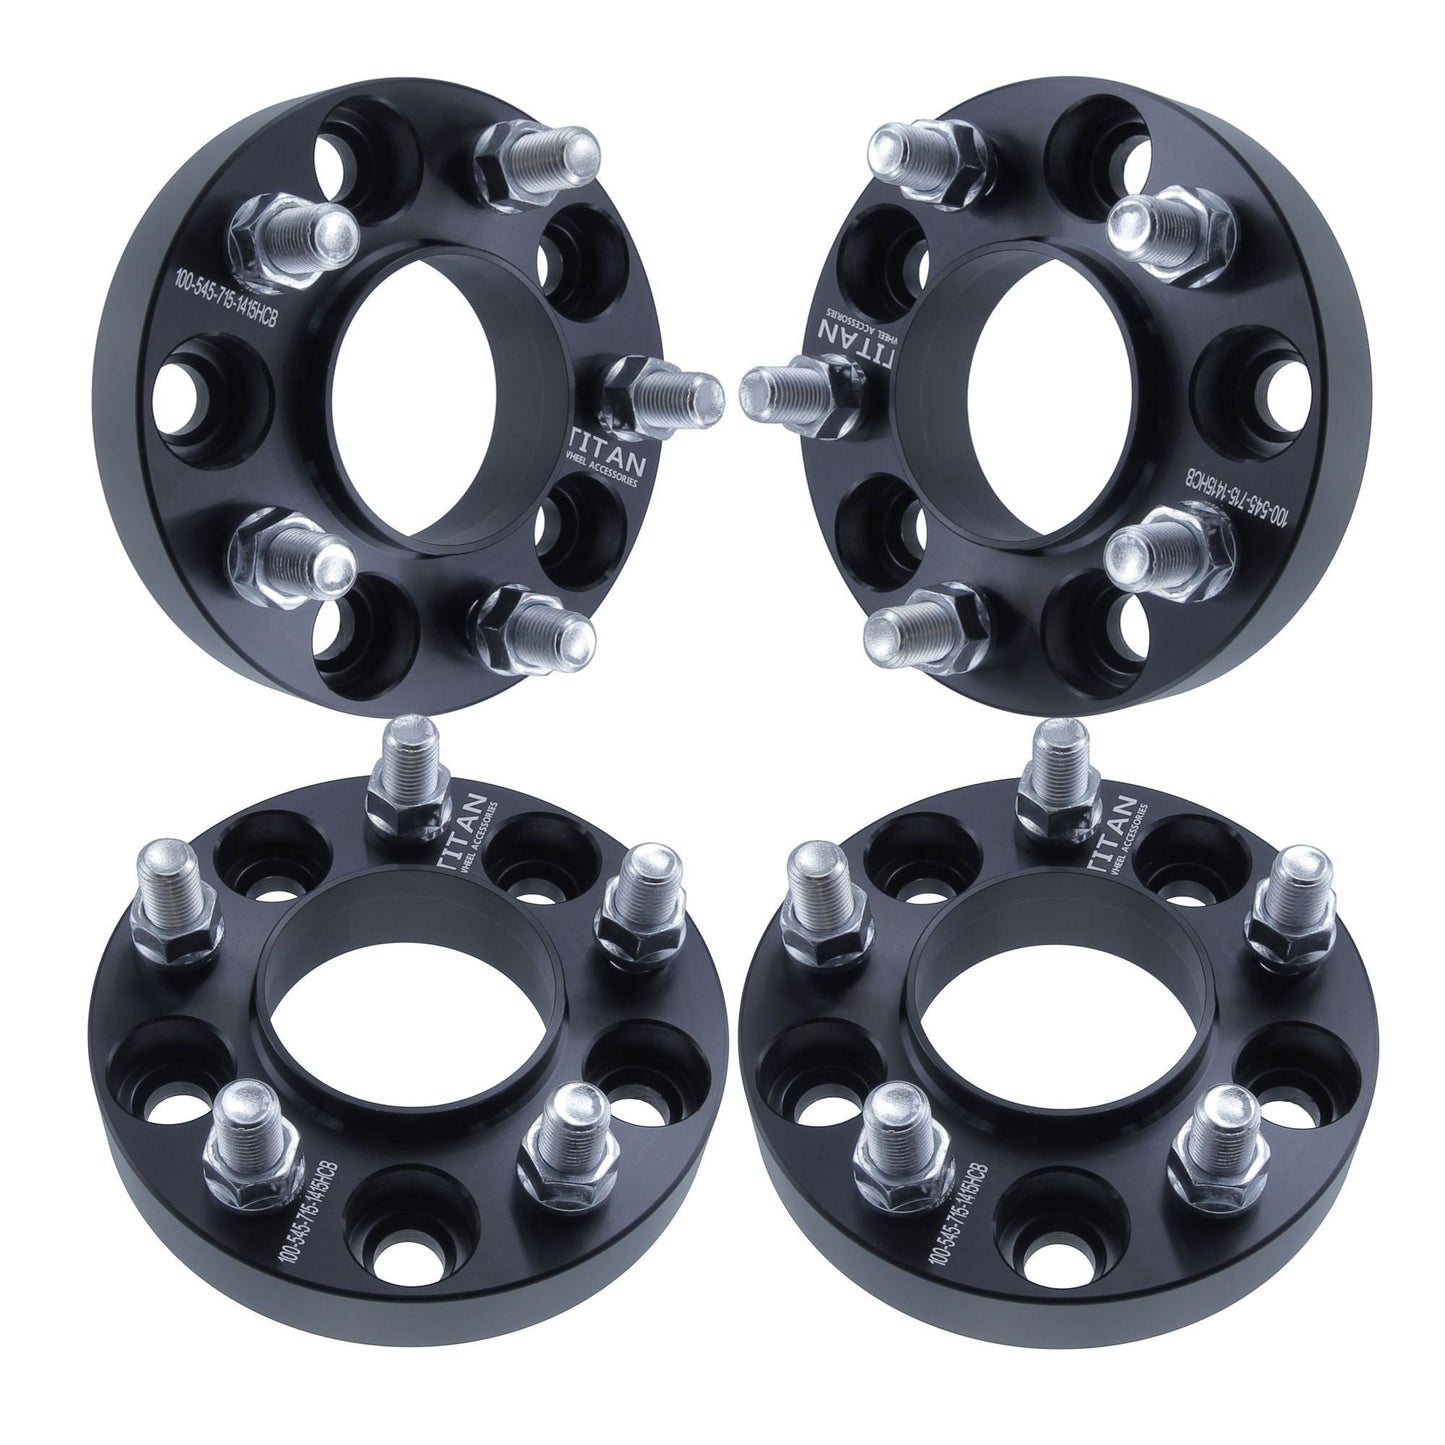 1.25" (38mm) Titan Wheel Spacers for Chrysler 300 Dodge Charger Challenger | 5x4.5 |14x1.5 | Set of 4 | Titan Wheel Accessories